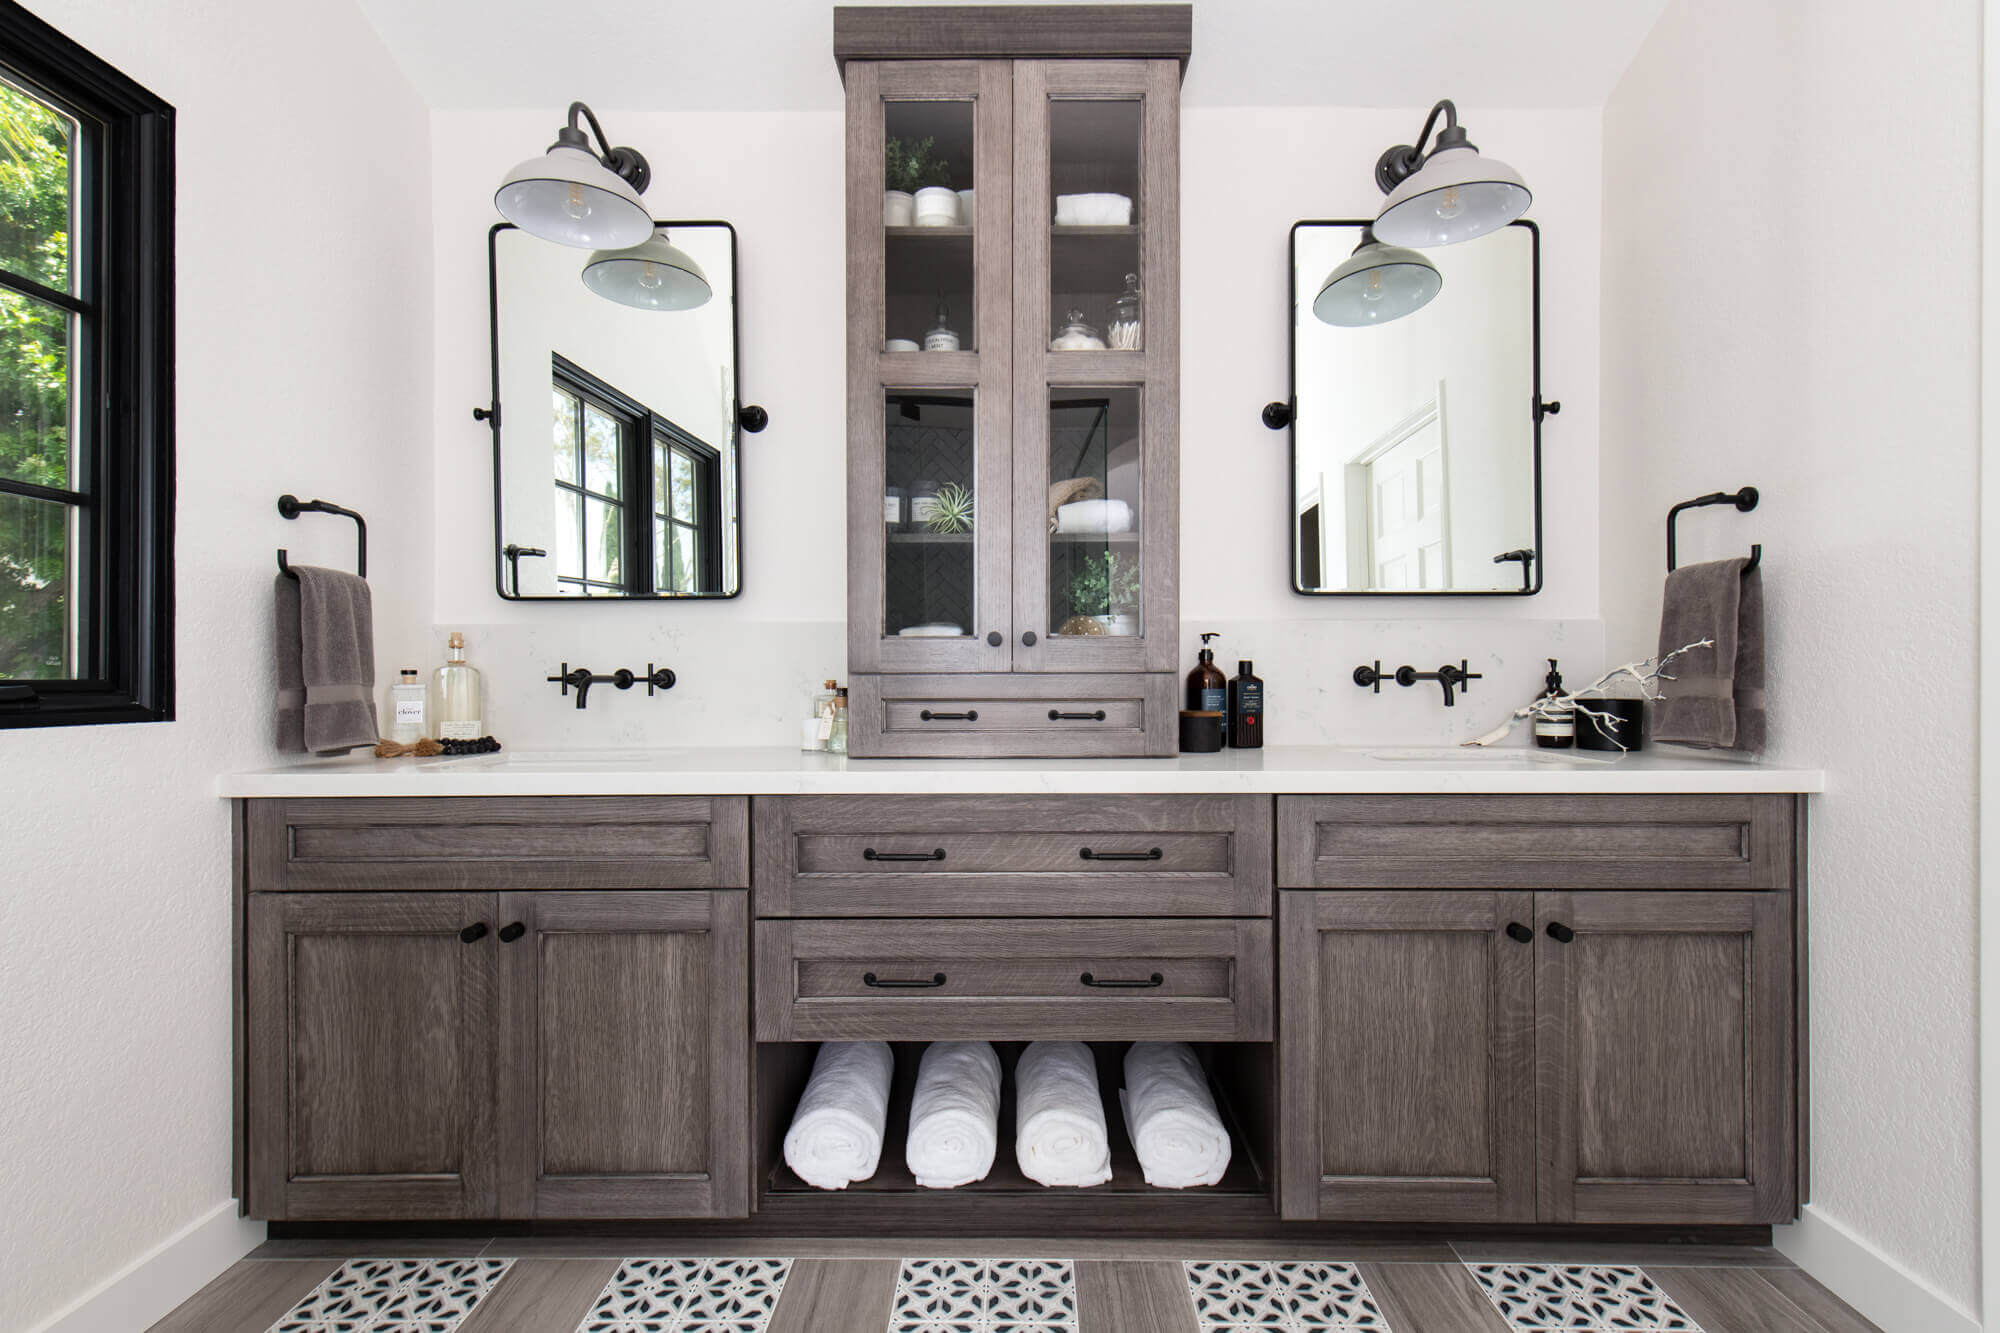 Remodeling Your Bathroom